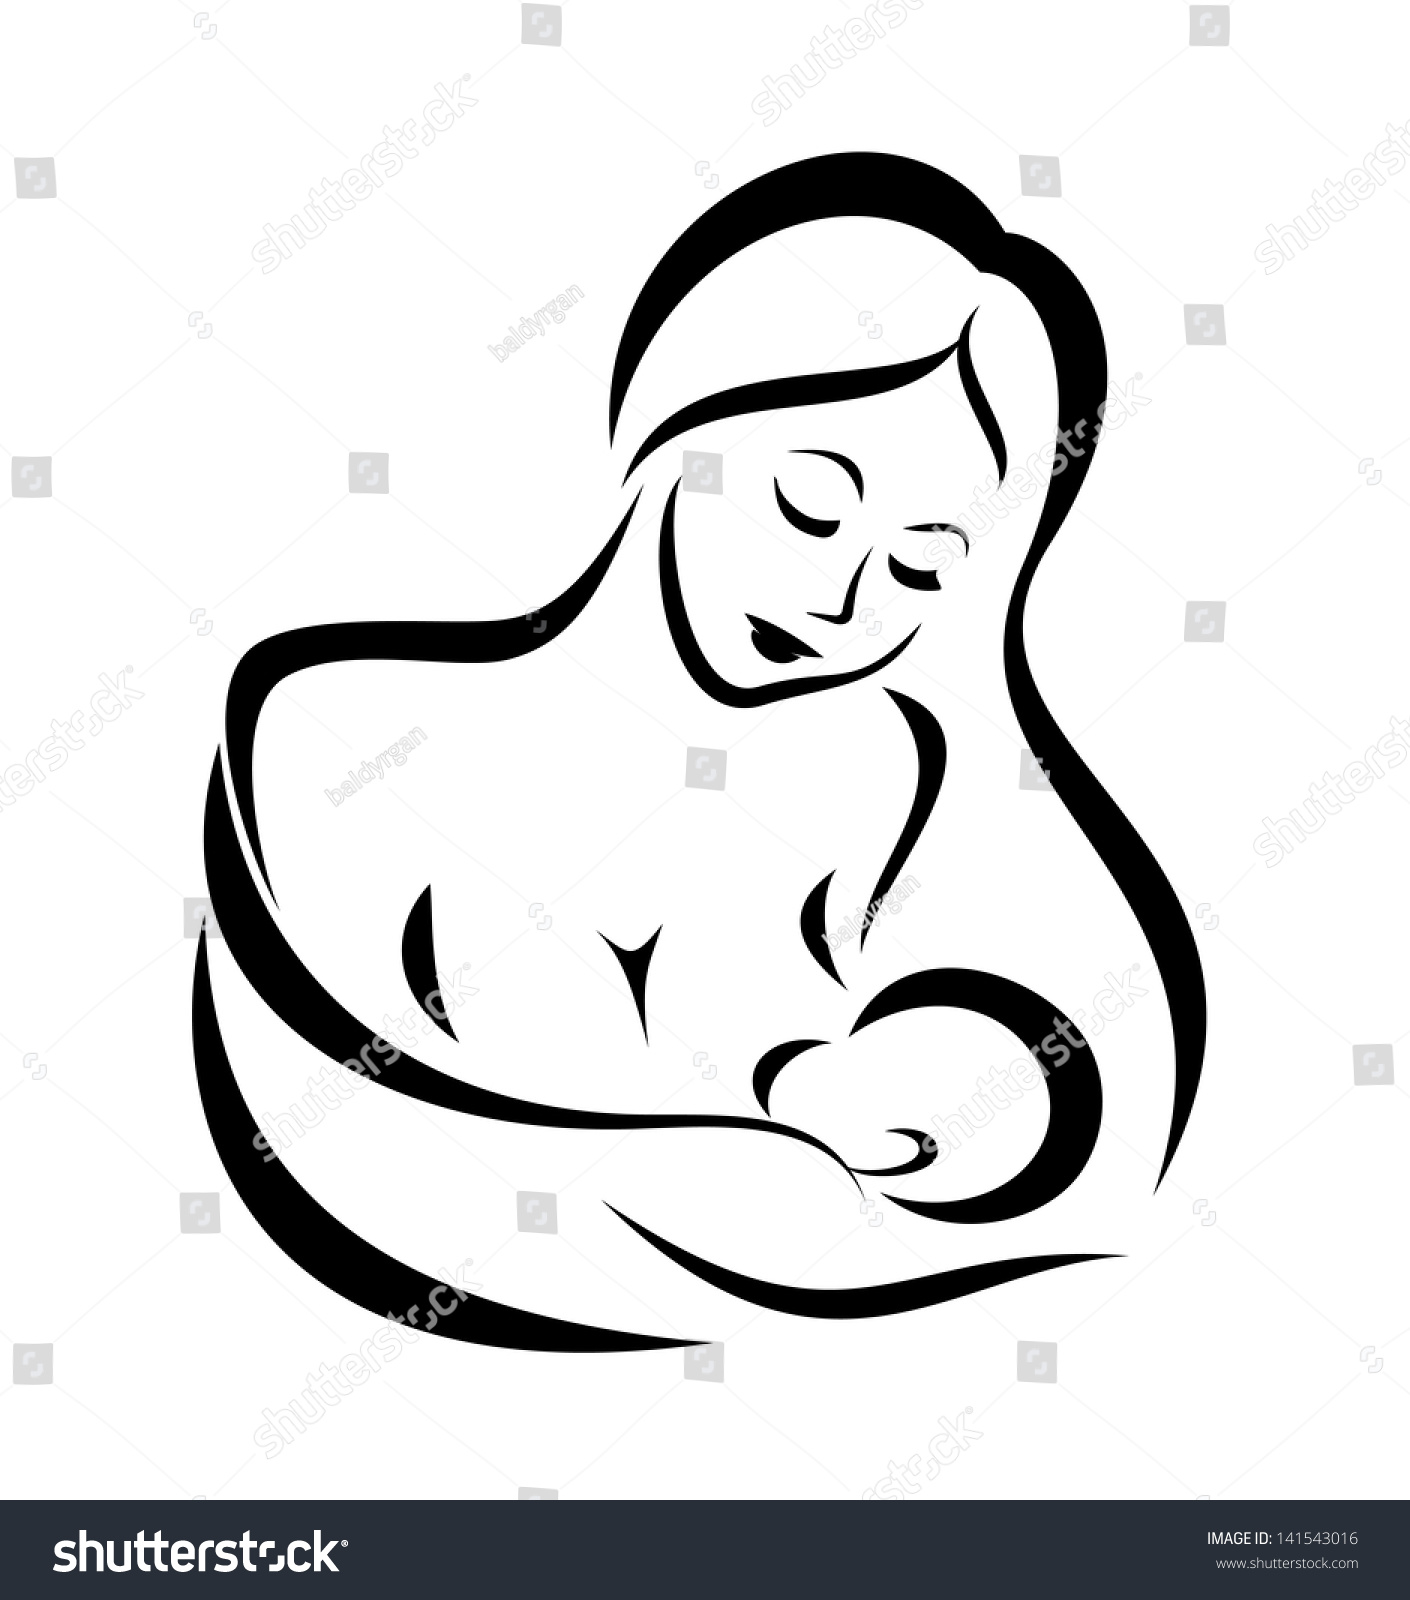 clipart of mother feeding baby - photo #21